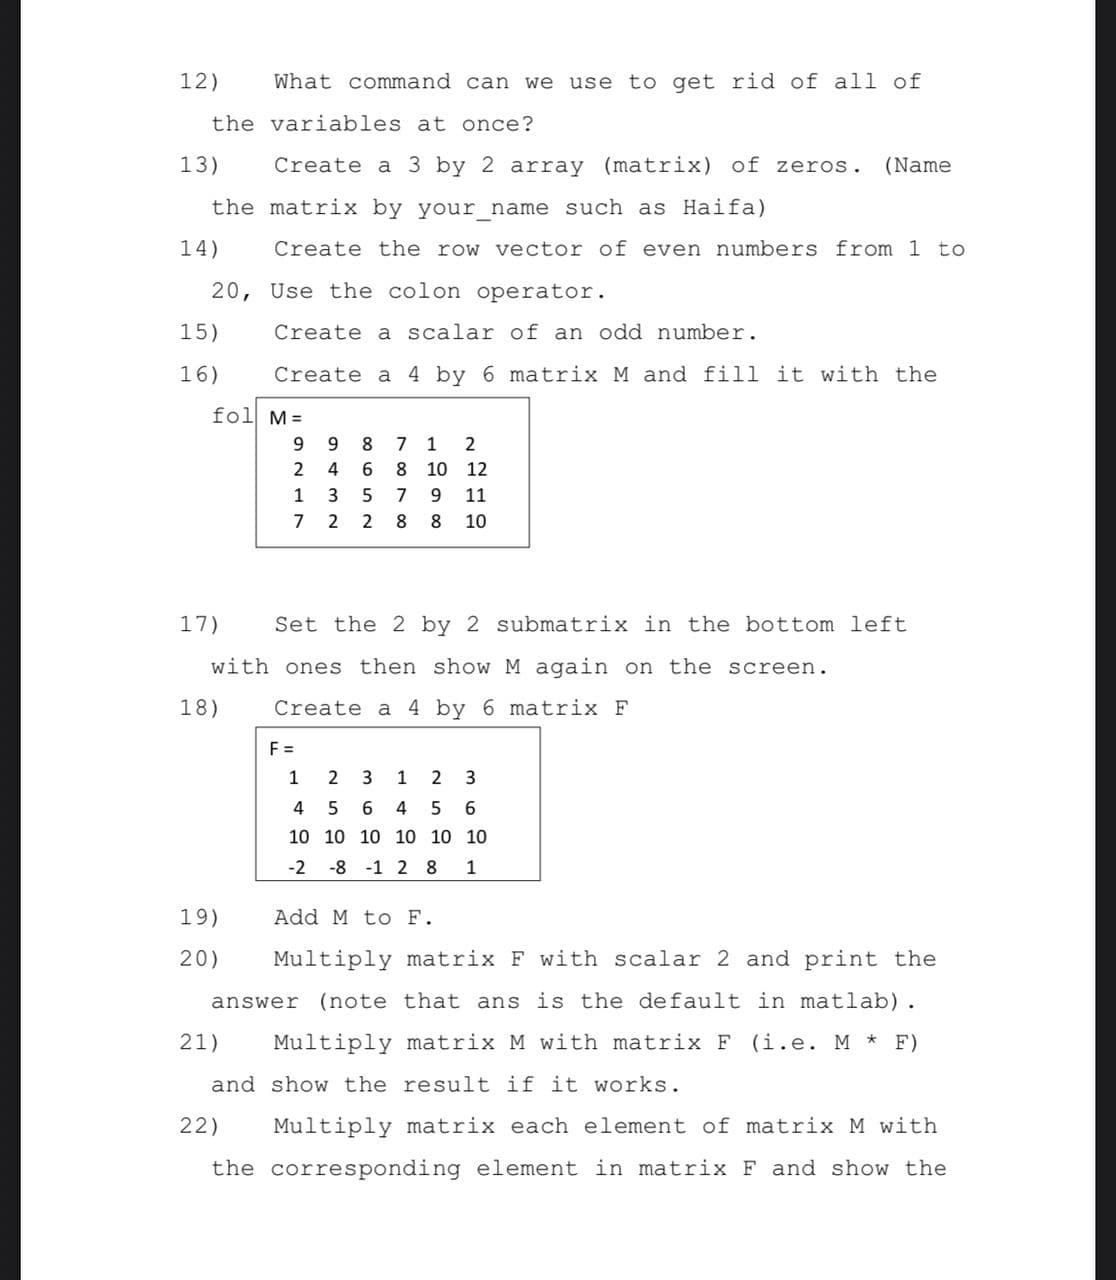 12)
What command can we use to get rid of all of
the variables at once?
13)
Create a 3 by 2 array (matrix) of zeros.
(Name
the matrix by your name such as Haifa)
14)
Create the row vector of even numbers from 1 to
20, Use the colon operator.
15)
Create a scalar of an odd number.
16)
Create a 4 by 6 matrix M and fill it with the
fol M=
9.
8.
1
2
4
6 8 10 12
1
3
5 7
9.
11
7
2
2
8.
10
17)
Set the 2 by 2 submatrix in the bottom left
with ones then show M again on the screen.
18)
Create a 4 by 6 matrix F
F =
1
2
3
1
4
6
6
10 10 10 10 10 10
-2
-8 -1 2 8
1
19)
Add M to F.
20)
Multiply matrix F with scalar 2 and print the
answer (note that ans is the default in matlab).
21)
Multiply matrix M with matrix F (i.e. M * F)
and show the result if it works.
22)
Multiply matrix each element of matrix M with
the corresponding element in matrix F and show the
